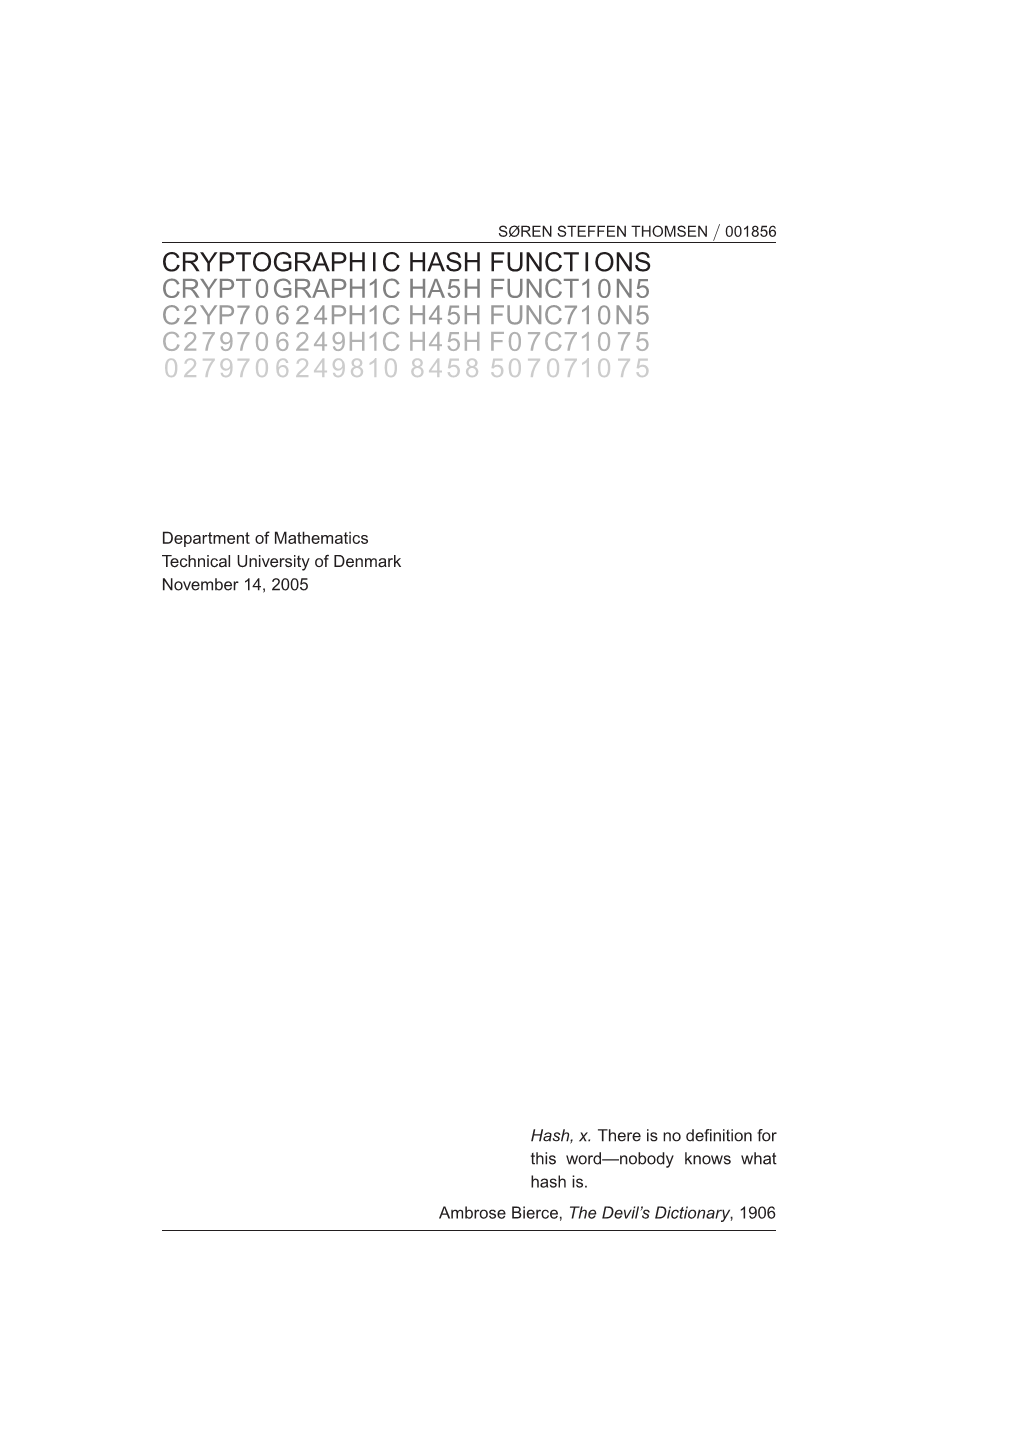 Cryptographic Hash Functions Are Very Brieﬂy Introduced, and a Short Summary of Each of the Following Chapters Is Given